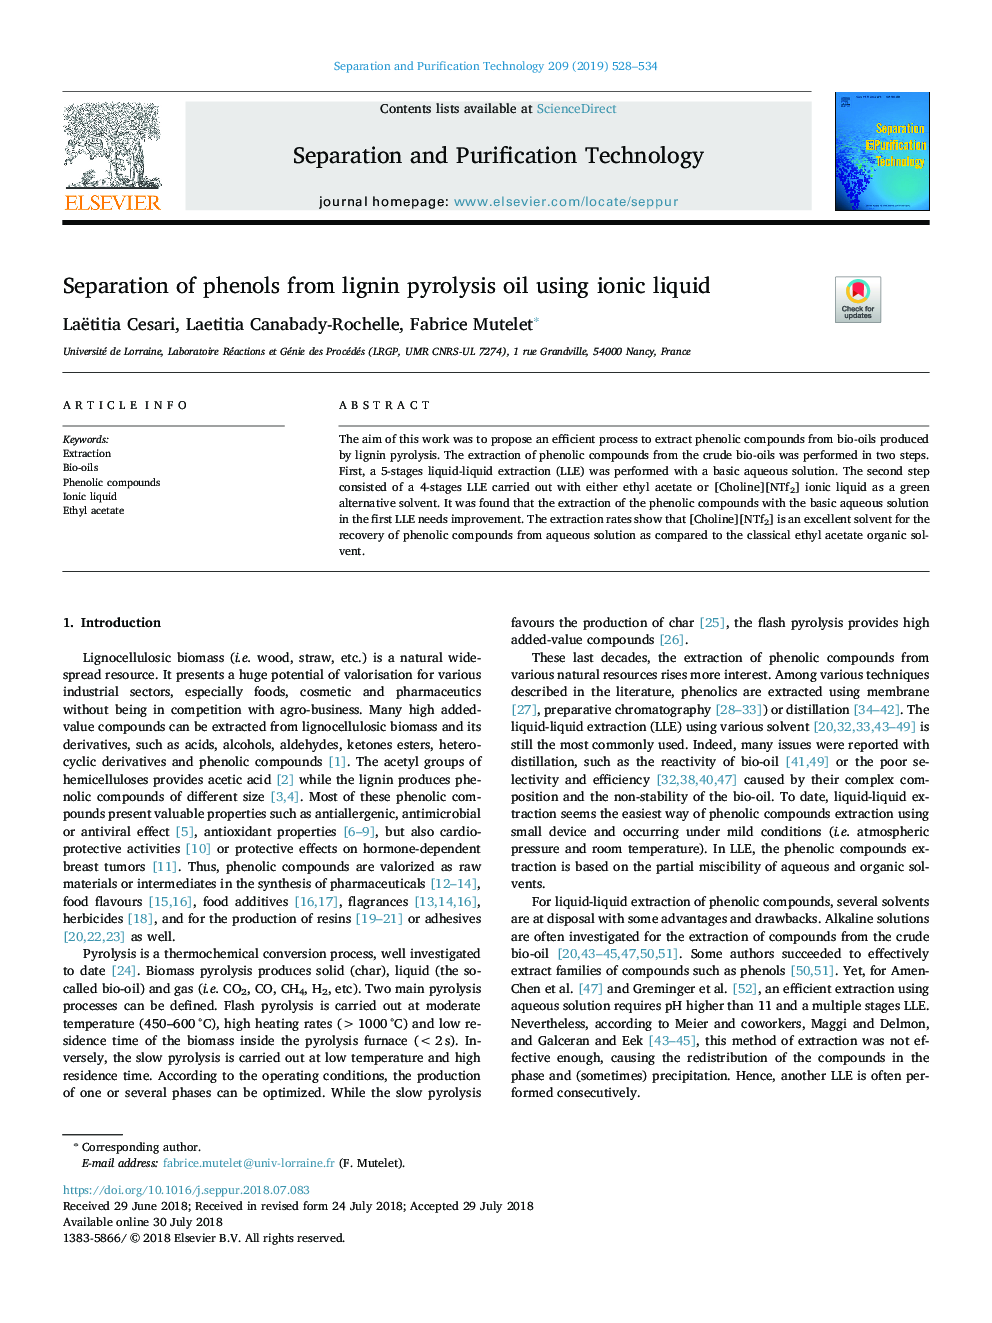 Separation of phenols from lignin pyrolysis oil using ionic liquid